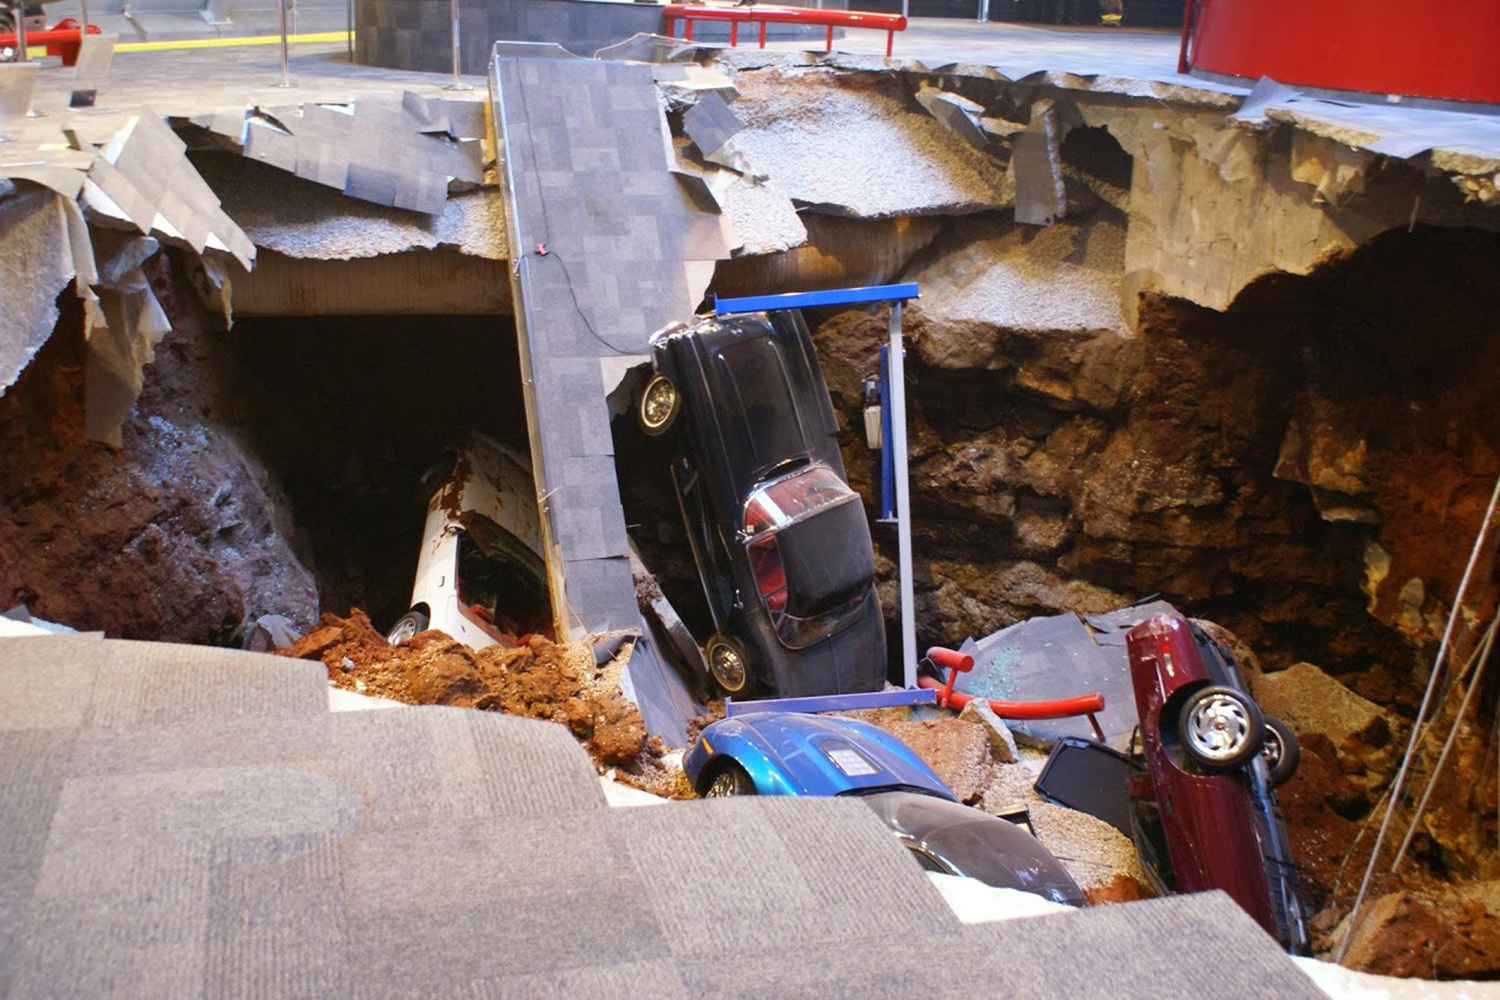 National Corvette Museum handout photo shows a sink hole that swallowed eight Corvettes in Bowling Green